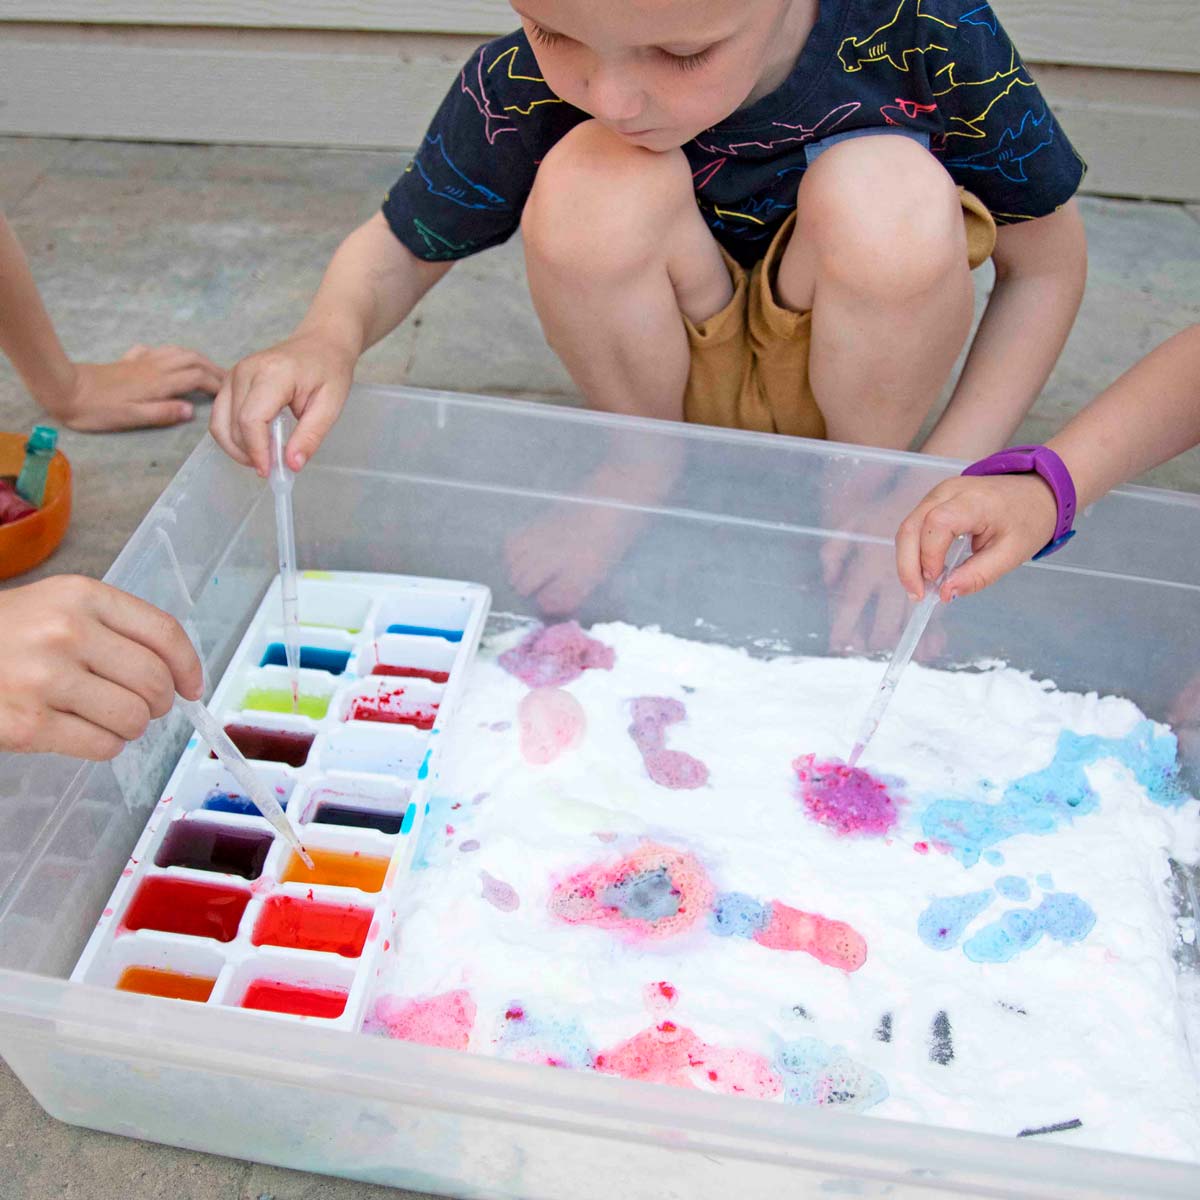 A child crouches down behind a plastic bin filled with baking soda. An ice cube tray next to him is full of colorful baking soda.